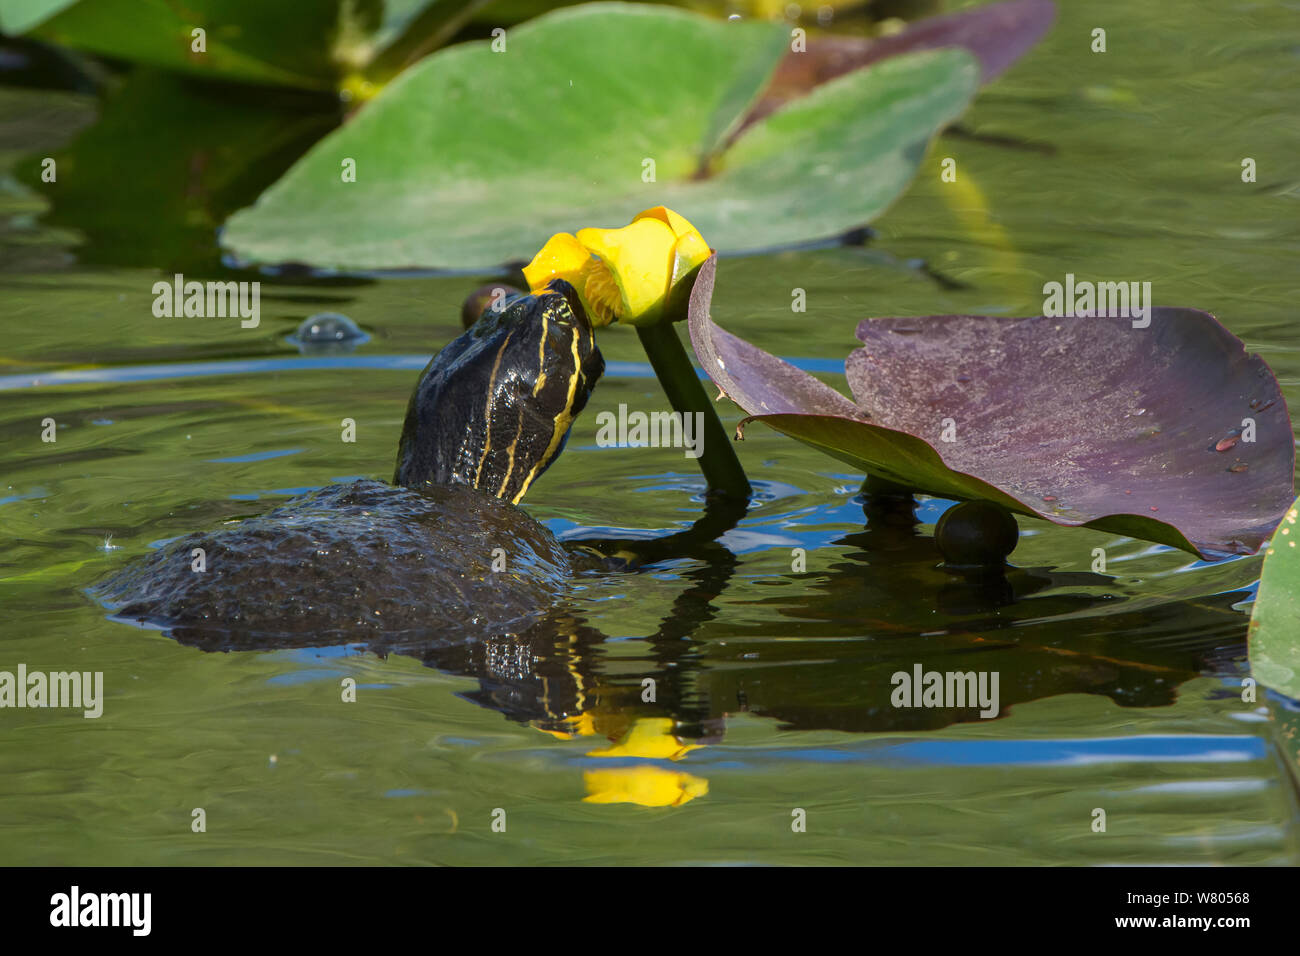 Florida cooter (Pseudemys concinna floridana) looking at Spatterdock waterlily (Nuphar advena), Everglades National Park, Florida, USA, March. Stock Photo